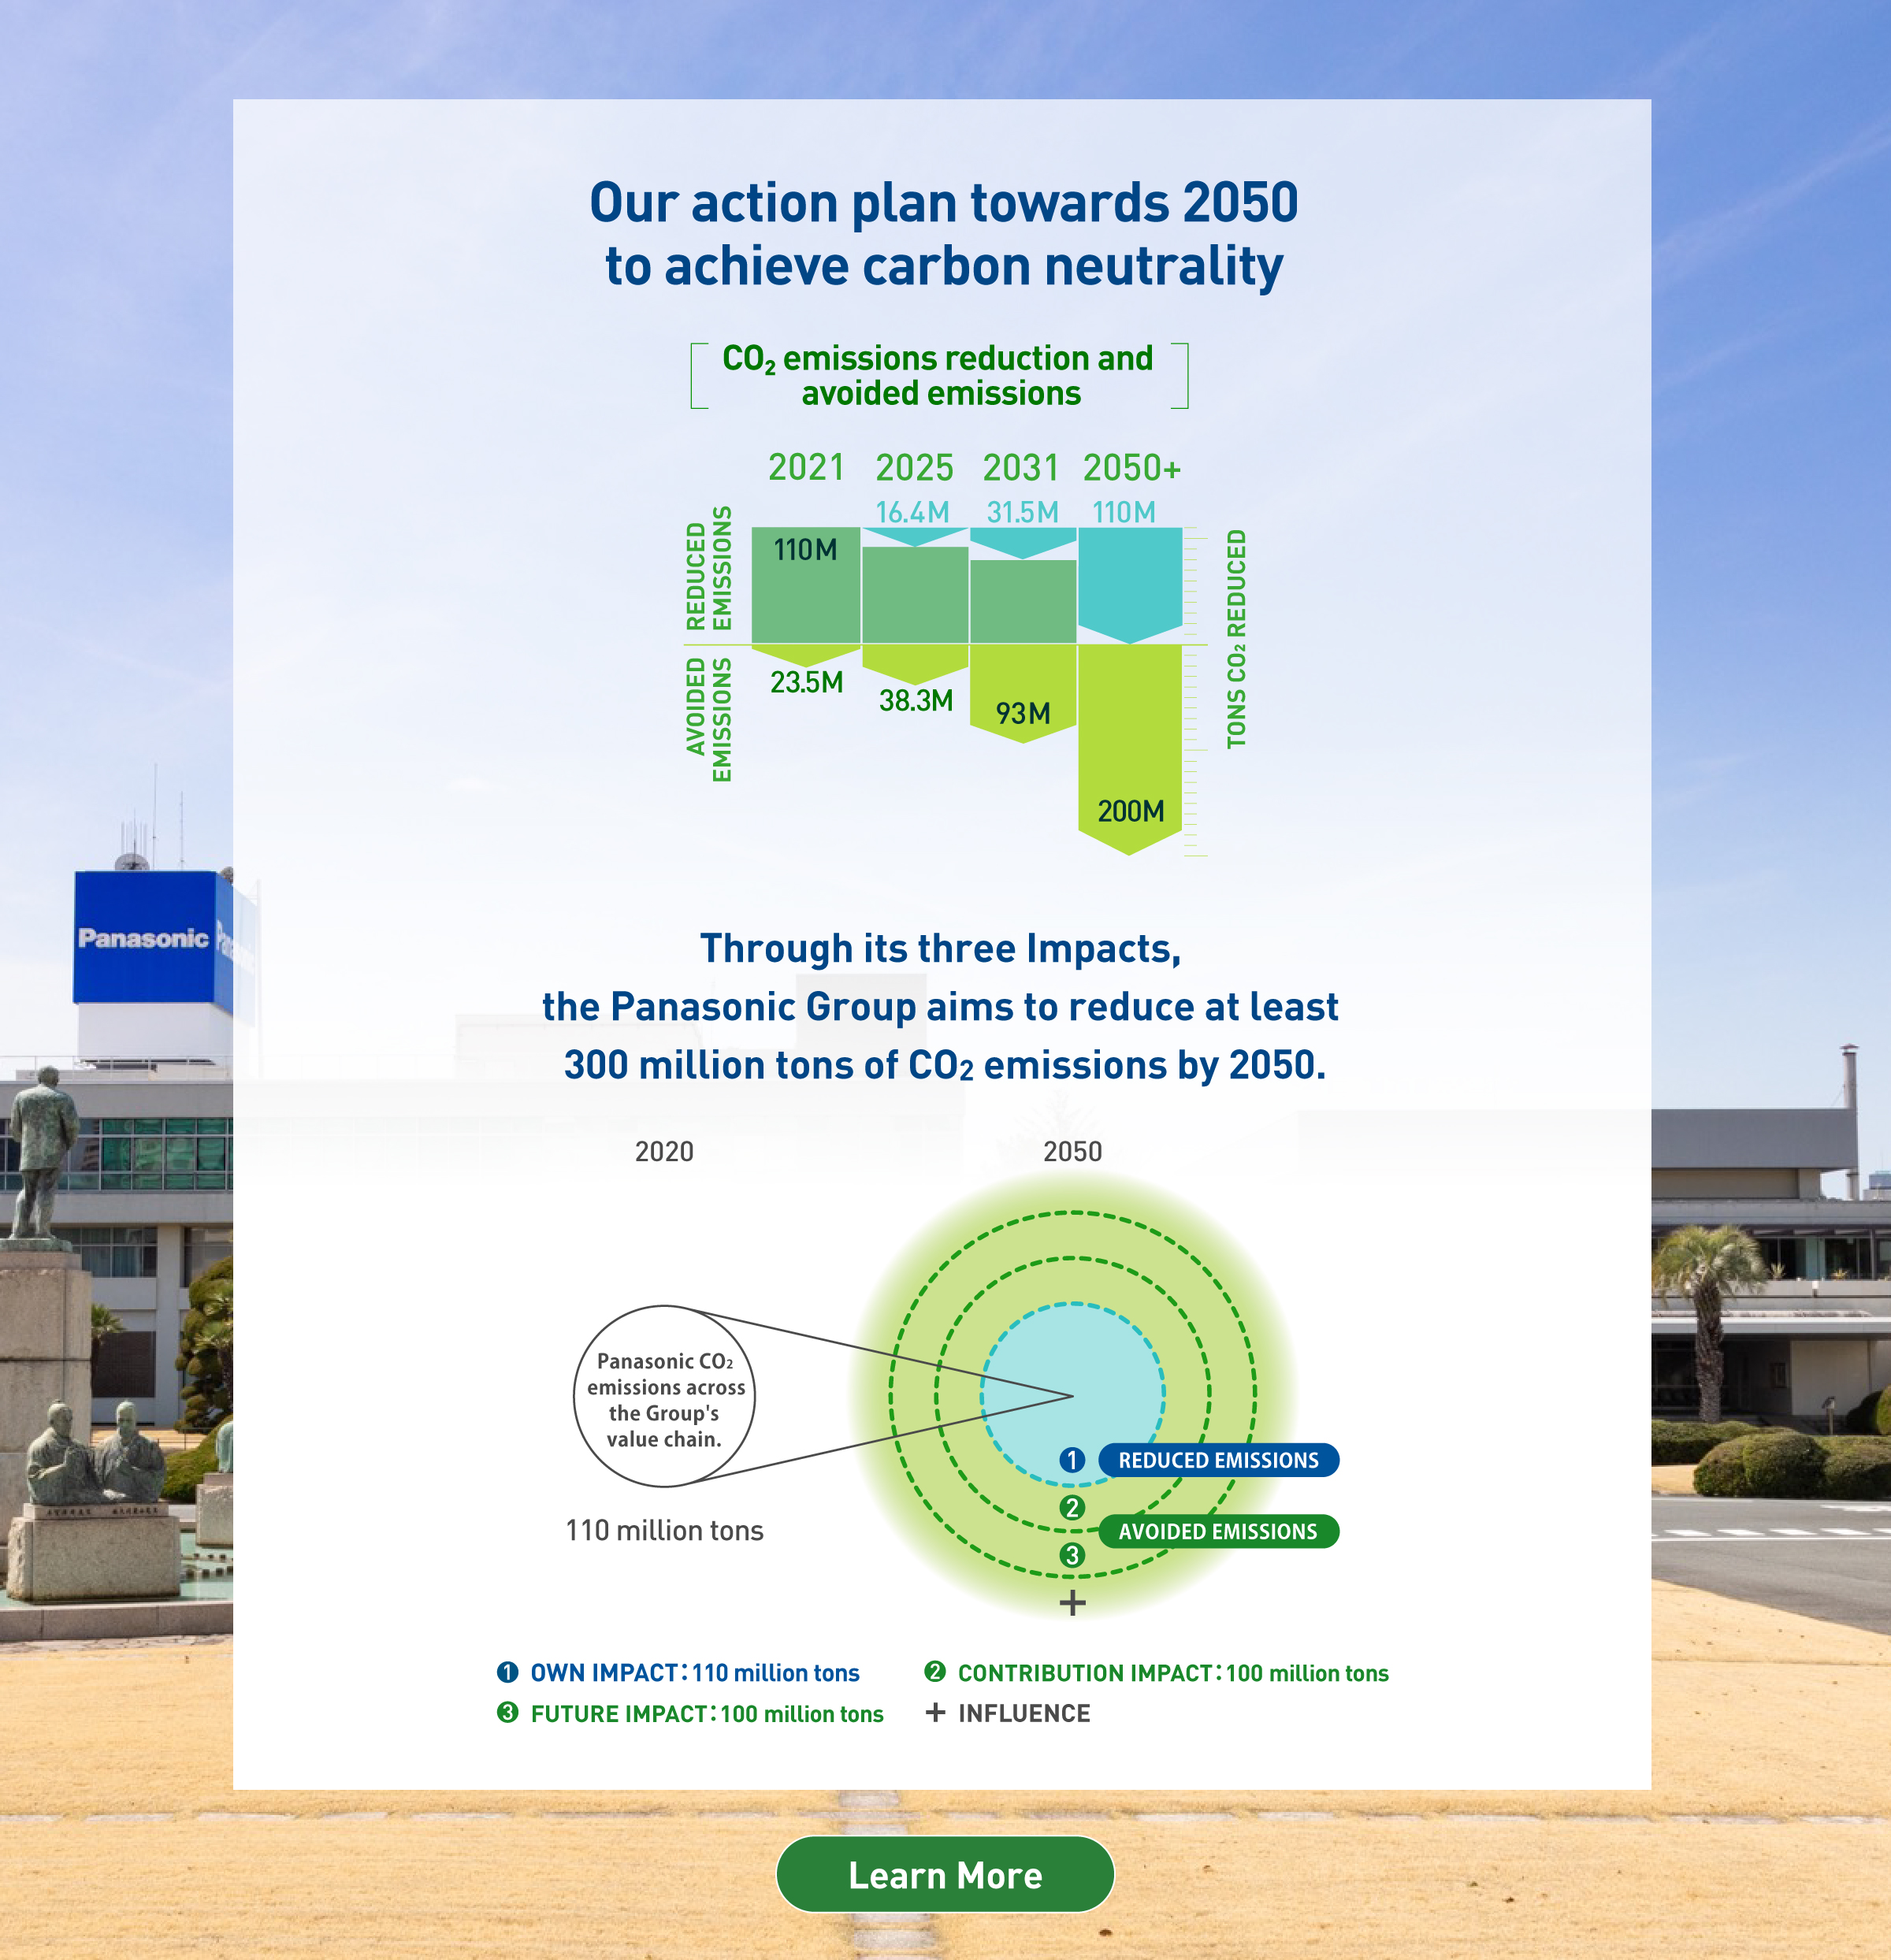 Our action plan towards 2050 to achieve carbon neutrality Graph illustrating the process of reducing over 300 million tons of CO2 emissions by fiscal year 2051 through a combination of CO2 emission reductions and avoided emissions. In fiscal year 2021, there were reductions of 110 million tons and avoided emissions of 23.47 million tons. By fiscal year 2025, reductions of 16.34 million tons and avoided emissions of 38.3 million tons are targeted. By fiscal year 2031, reductions of 31.45 million tons and avoided emissions of 93 million tons are aimed for. Finally, by fiscal year 2051, reductions of 110 million tons and avoided emissions of 200 million tons are targeted. Our action plan towards 2050 to achieve carbon neutrality Through its three Impacts, the Panasonic Group aims to reduce at least 300 million tons of CO2 emissions by 2050. Conceptual diagram illustrating the expansion towards carbon neutrality from fiscal year 2021 to 2051. There is a small circle on the left and a large concentric circle with three layers on the right. The circle on the left represents the CO2 emissions of 110 million tons within our own value chain in fiscal year 2021, while the concentric circle on the right represents the impact of over 300 million tons of CO2 reduction by Panasonic GREEN IMPACT in fiscal year 2051. The concentric circle on the right is divided into OWN IMPACT, with the central circle representing it, CONTRIBUTION IMPACT with two layers, and FUTURE IMPACT with three layers. Additionally, there is a +INFLUENCE spreading outside the three concentric circles. OWN IMPACT aims for a reduction of 110 million tons of emissions, while CONTRIBUTION IMPACT and FUTURE IMPACT each aim for avoided emissions of 100 million tons. Background image: Front view of Panasonic headquarters. Learn more.